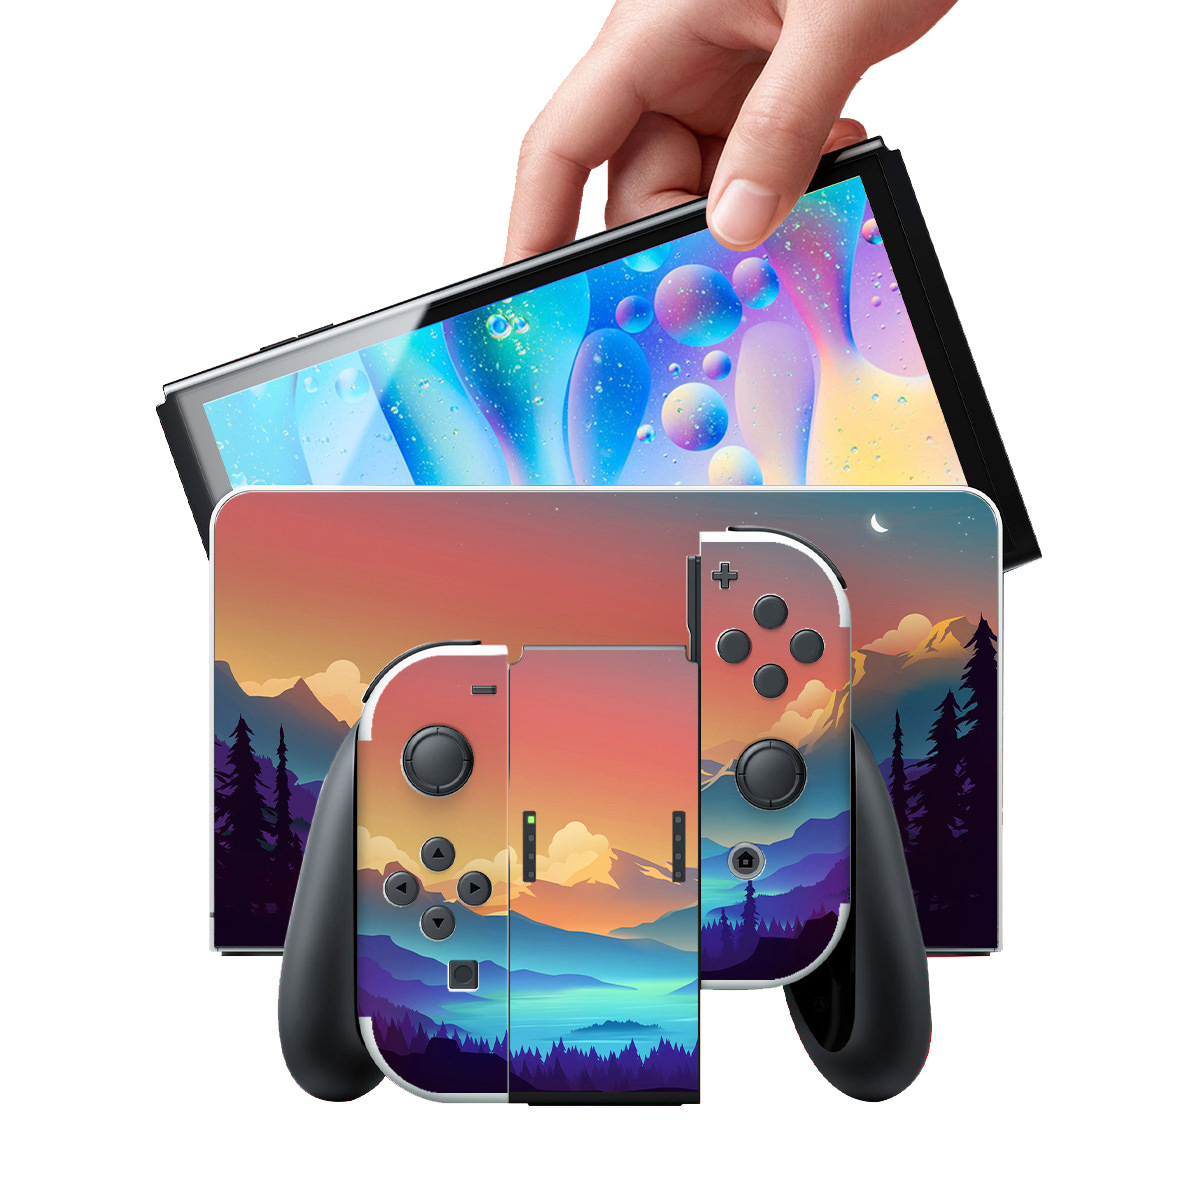 Sea of Clouds Premium 3M Skins Set for Nintendo Switch